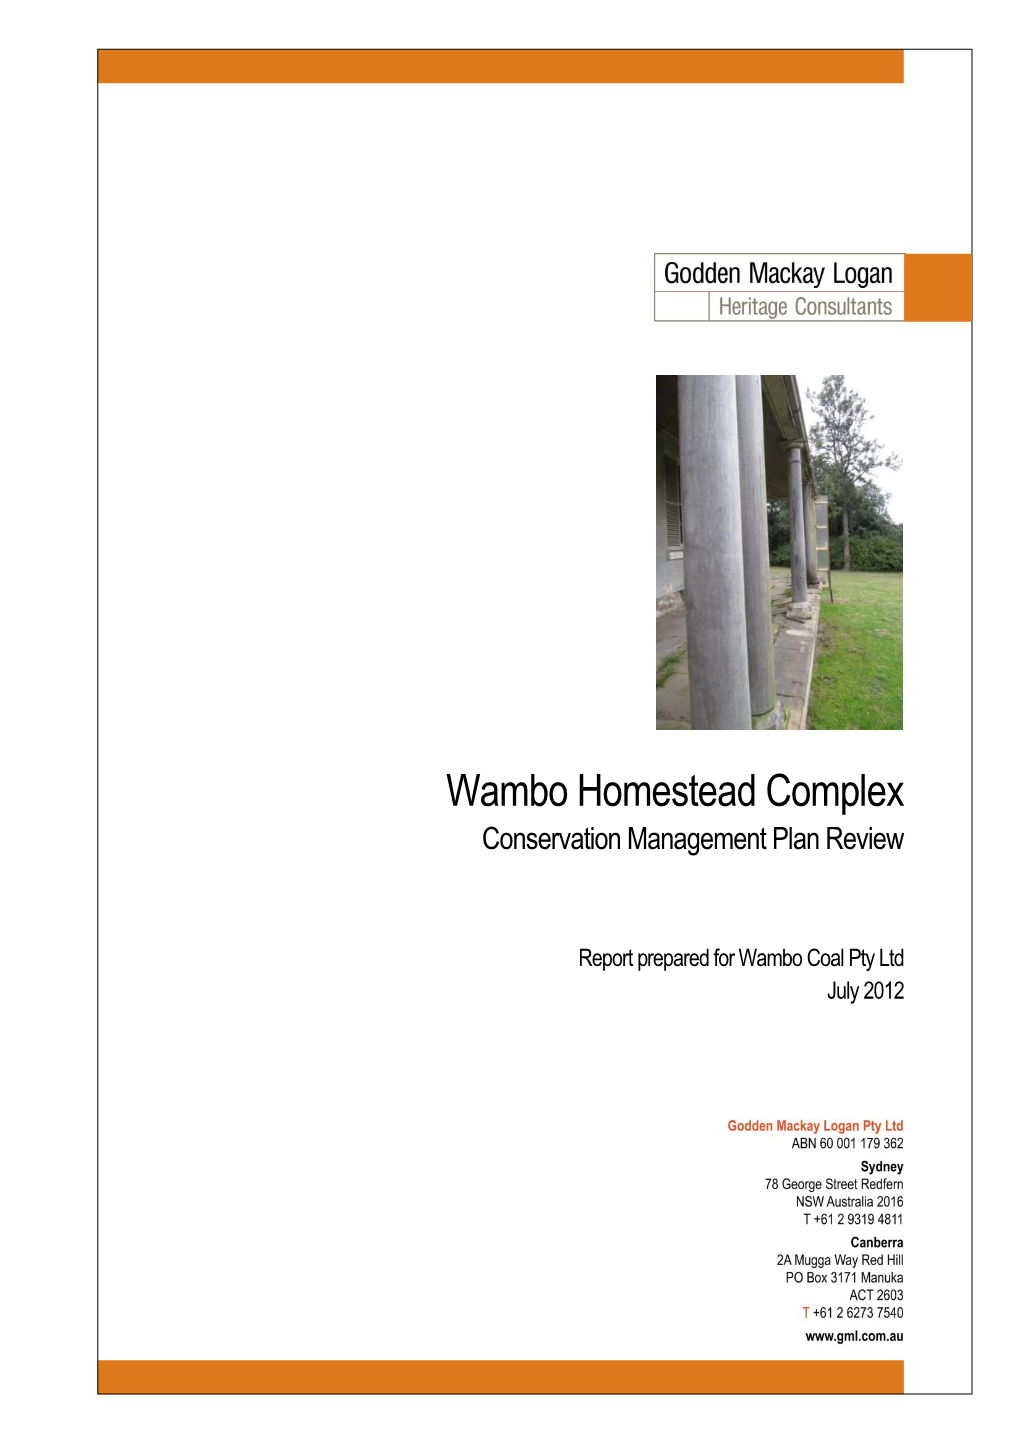 Wambo Homestead Complex Conservation Management Plan Review